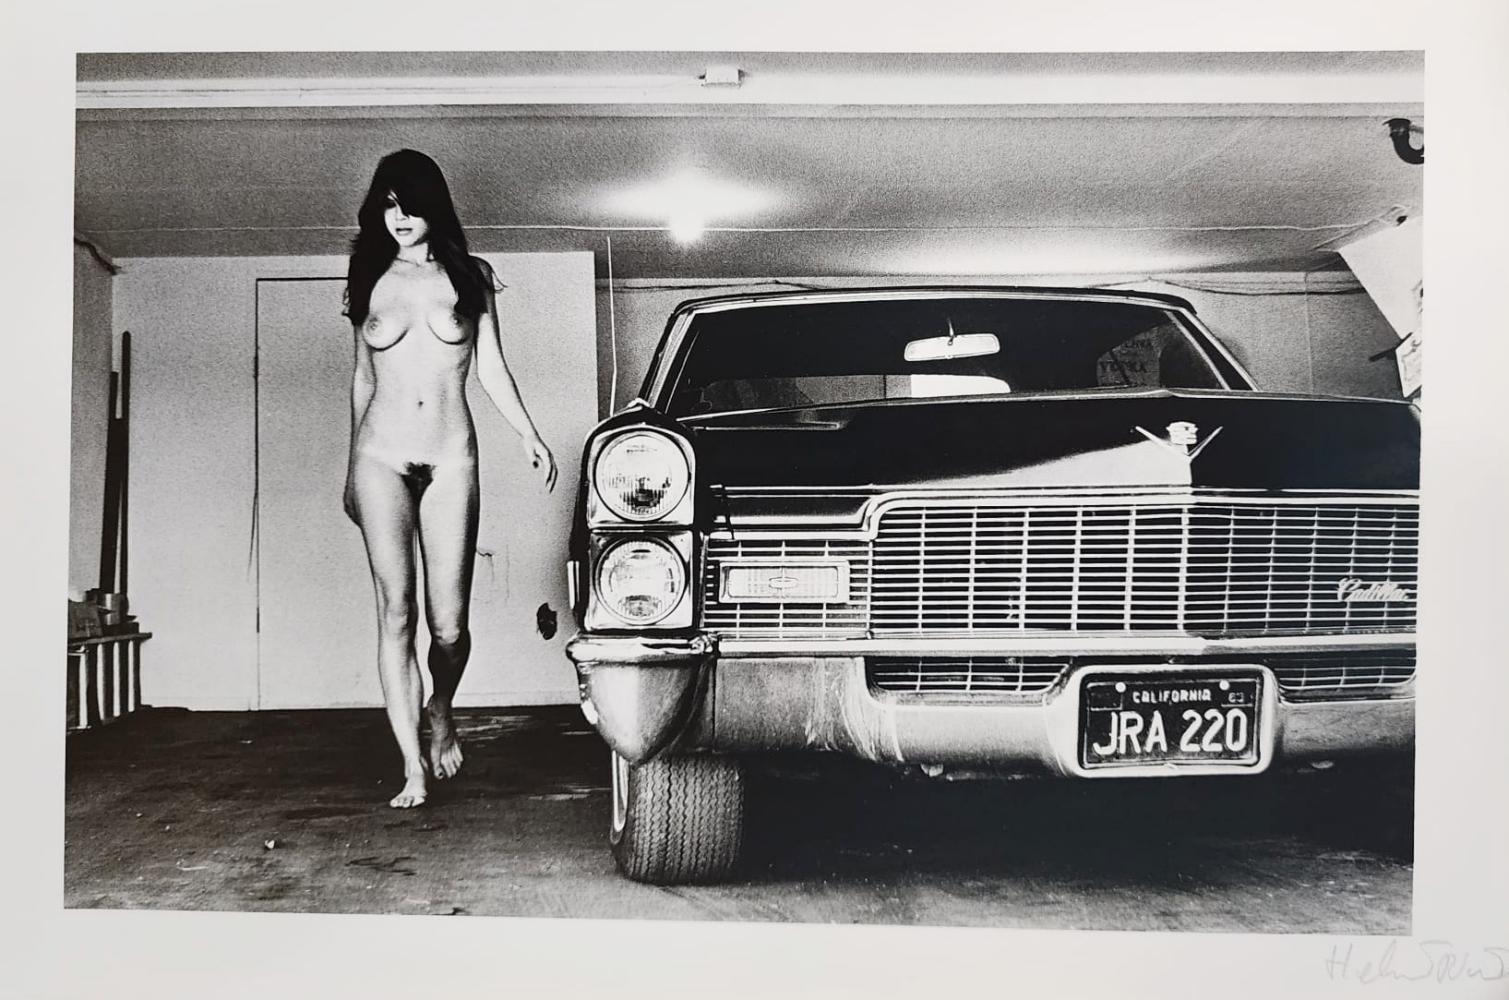 HELMUT NEWTON, CADILLAC HOLLYWOOD, 1976, HAND SIGNED - Photograph by Helmut Newton